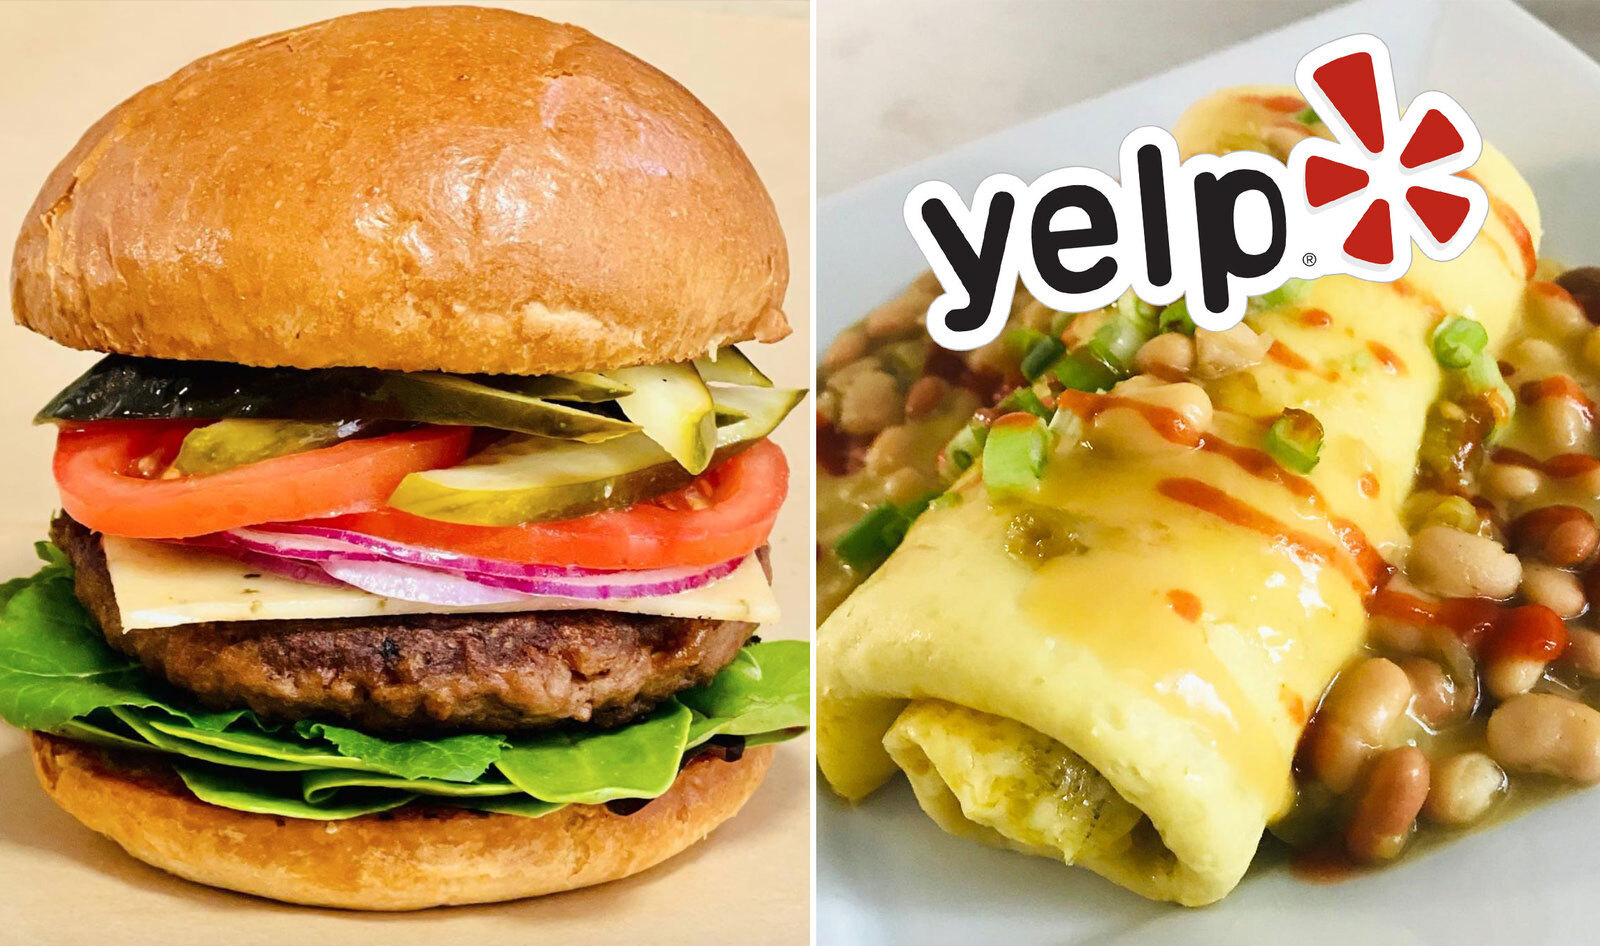 Yelp’s Top Place to Eat in 2021 Is a Vegan Restaurant in West Virginia